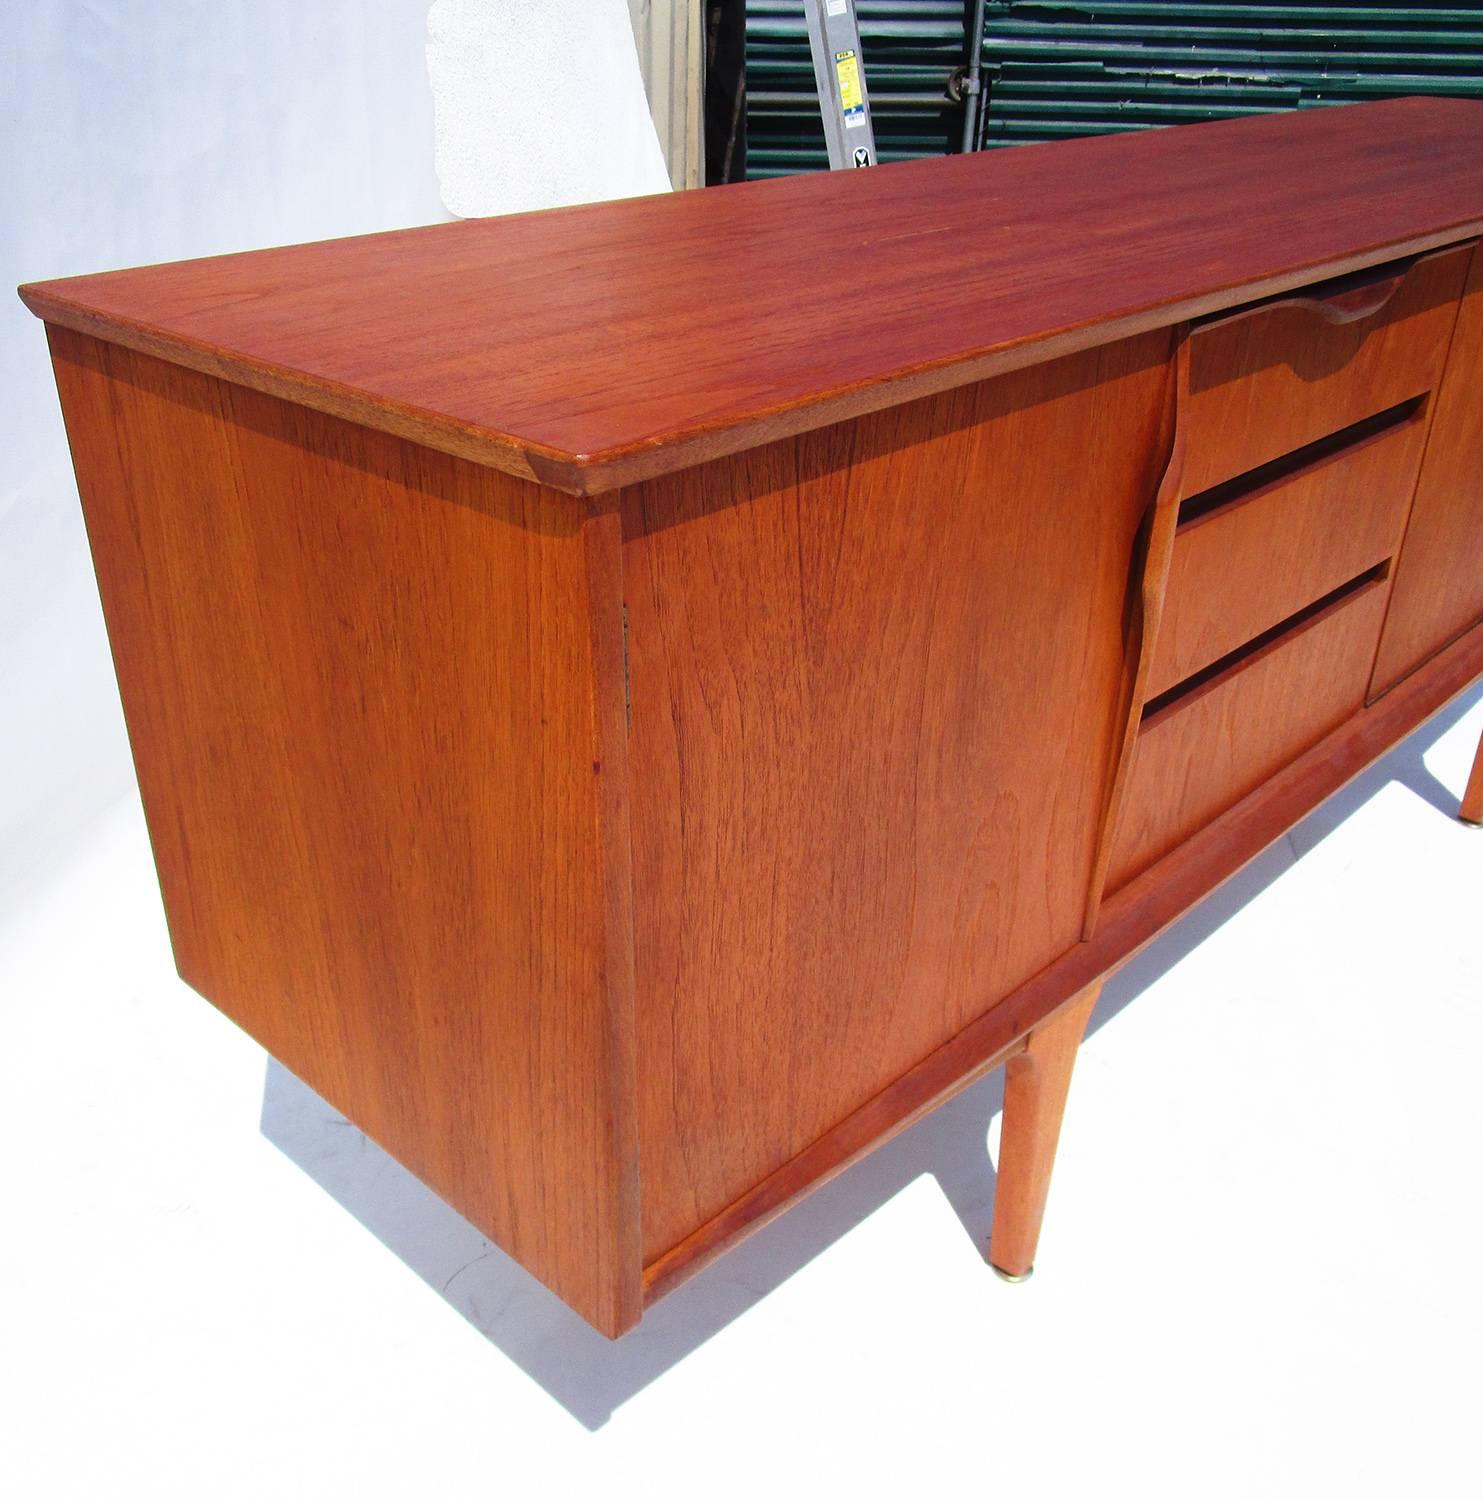 A Classic and clean design featuring tree drawers and three cabinet spaces for storage. Nice original condition.